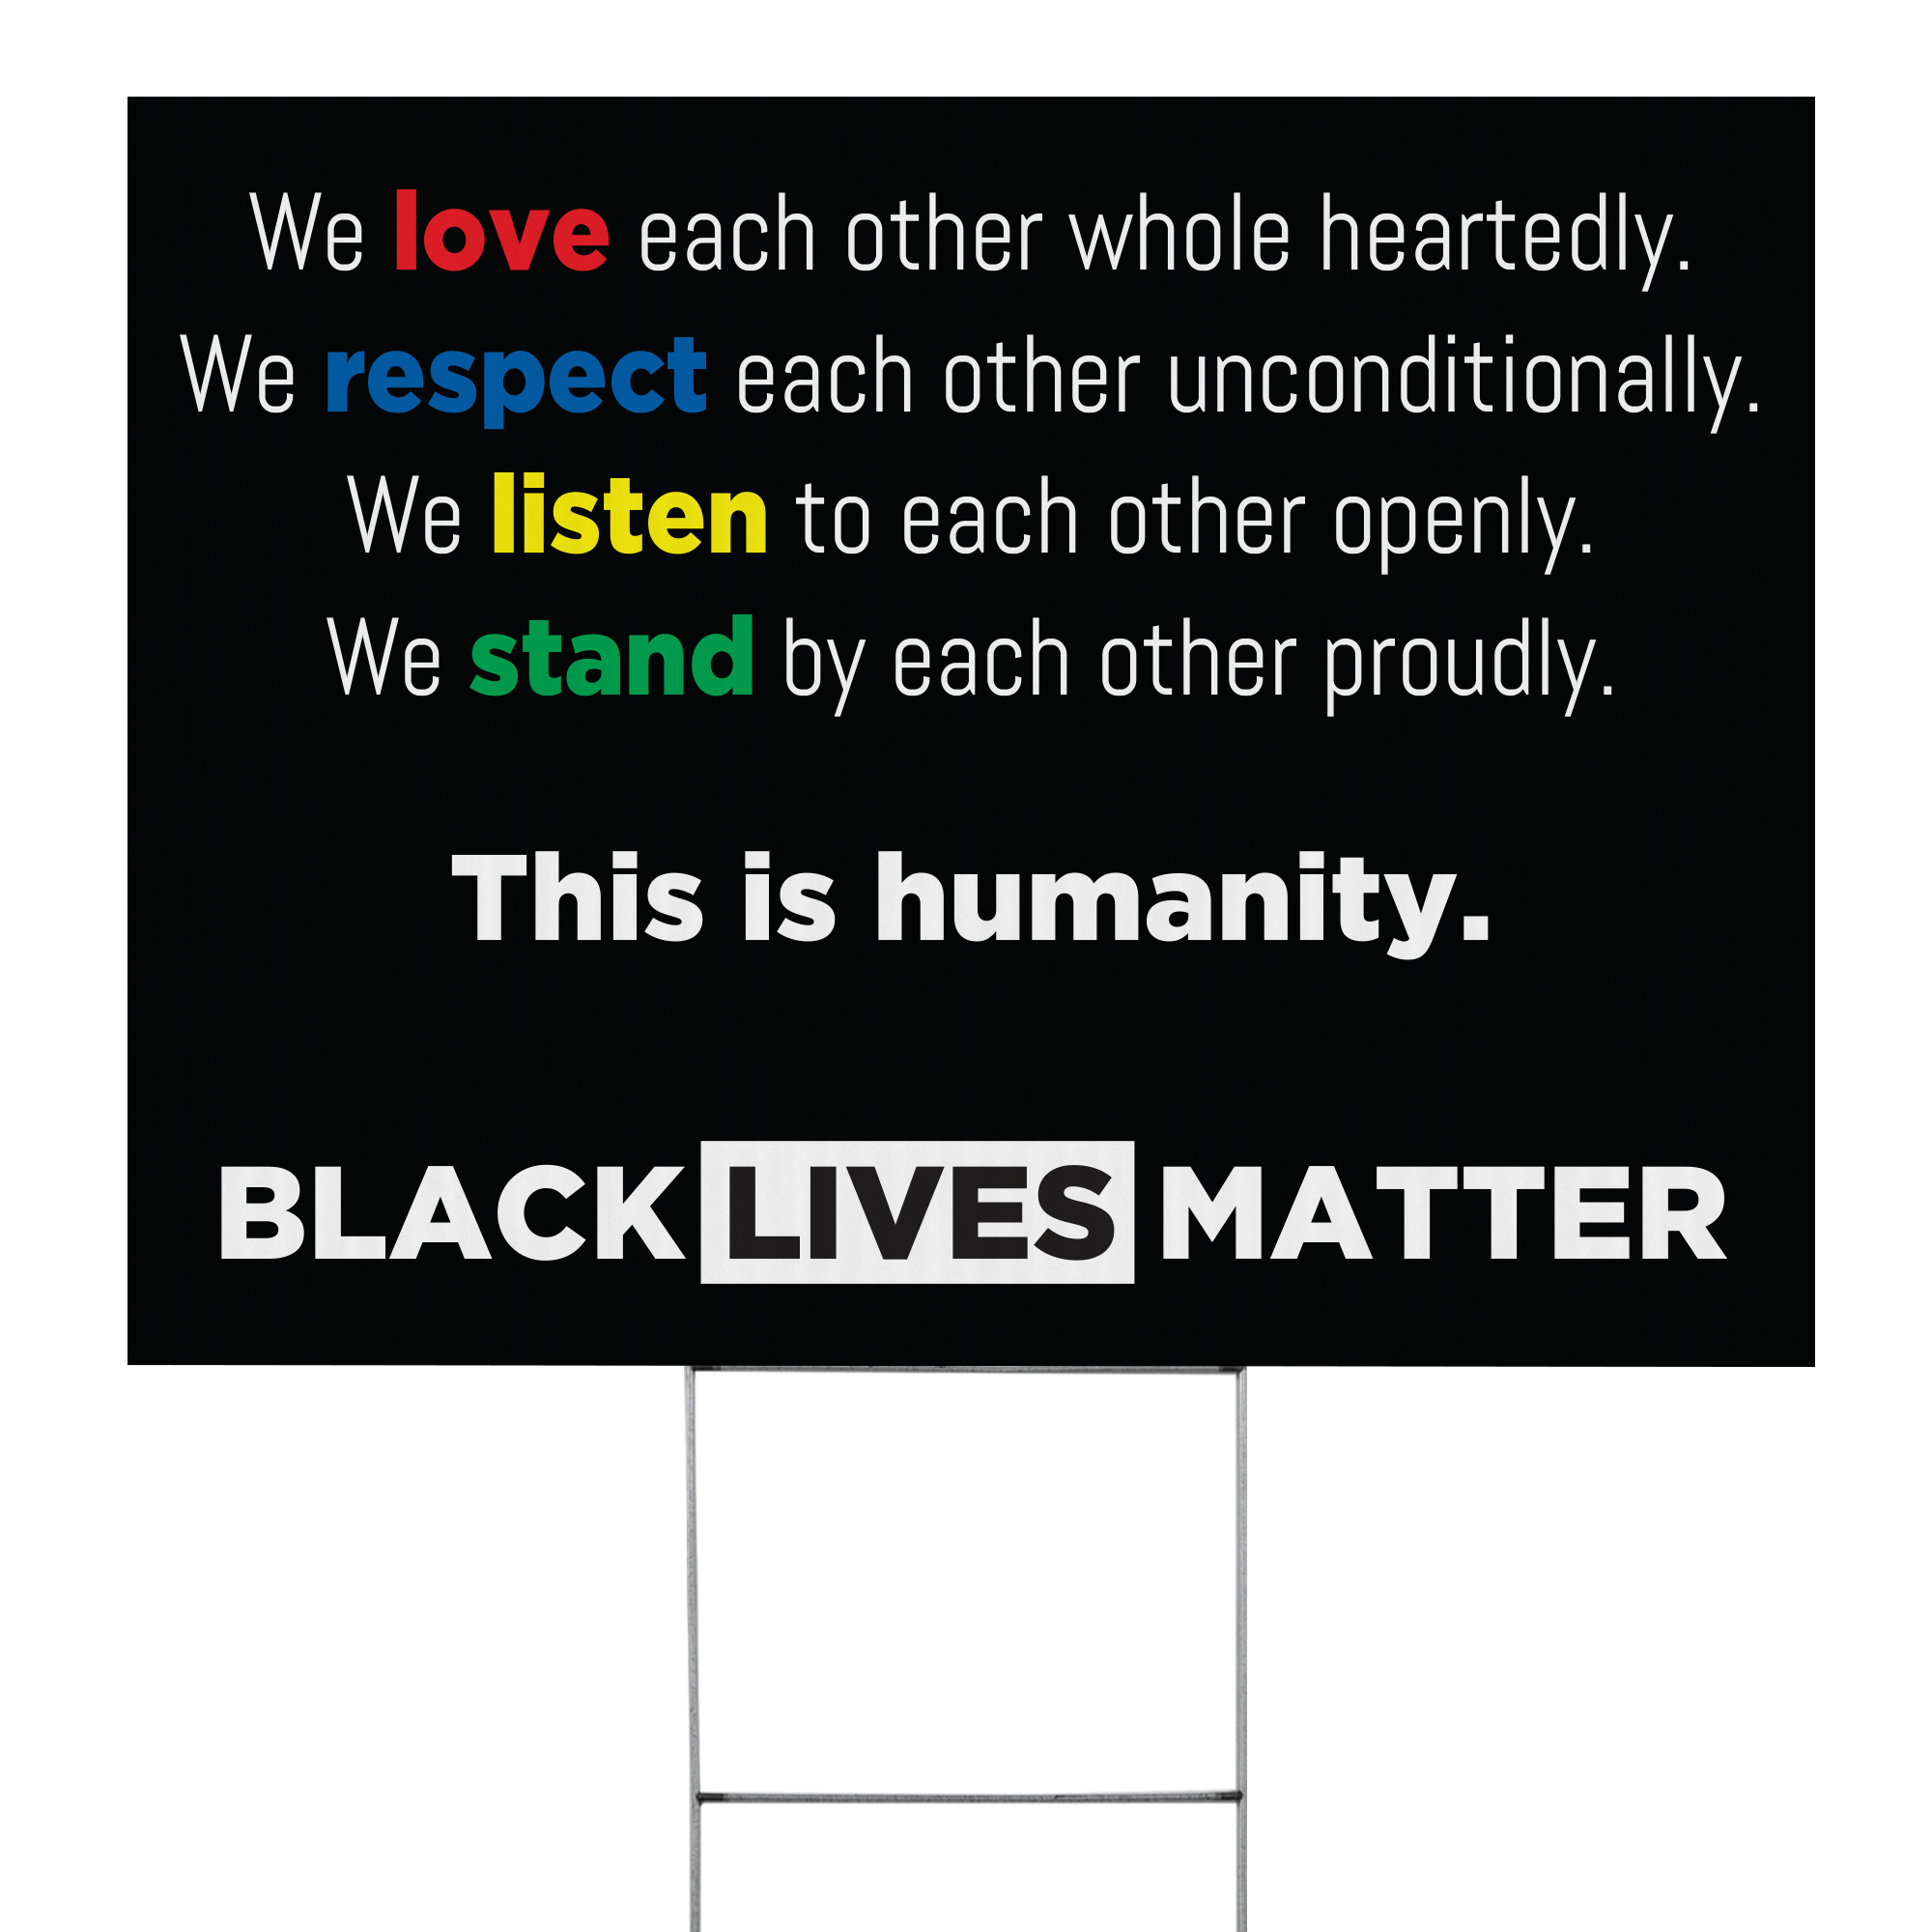 BLACK LIVES MATTER - This is Humanity Yard Sign - 24 x 18 inch